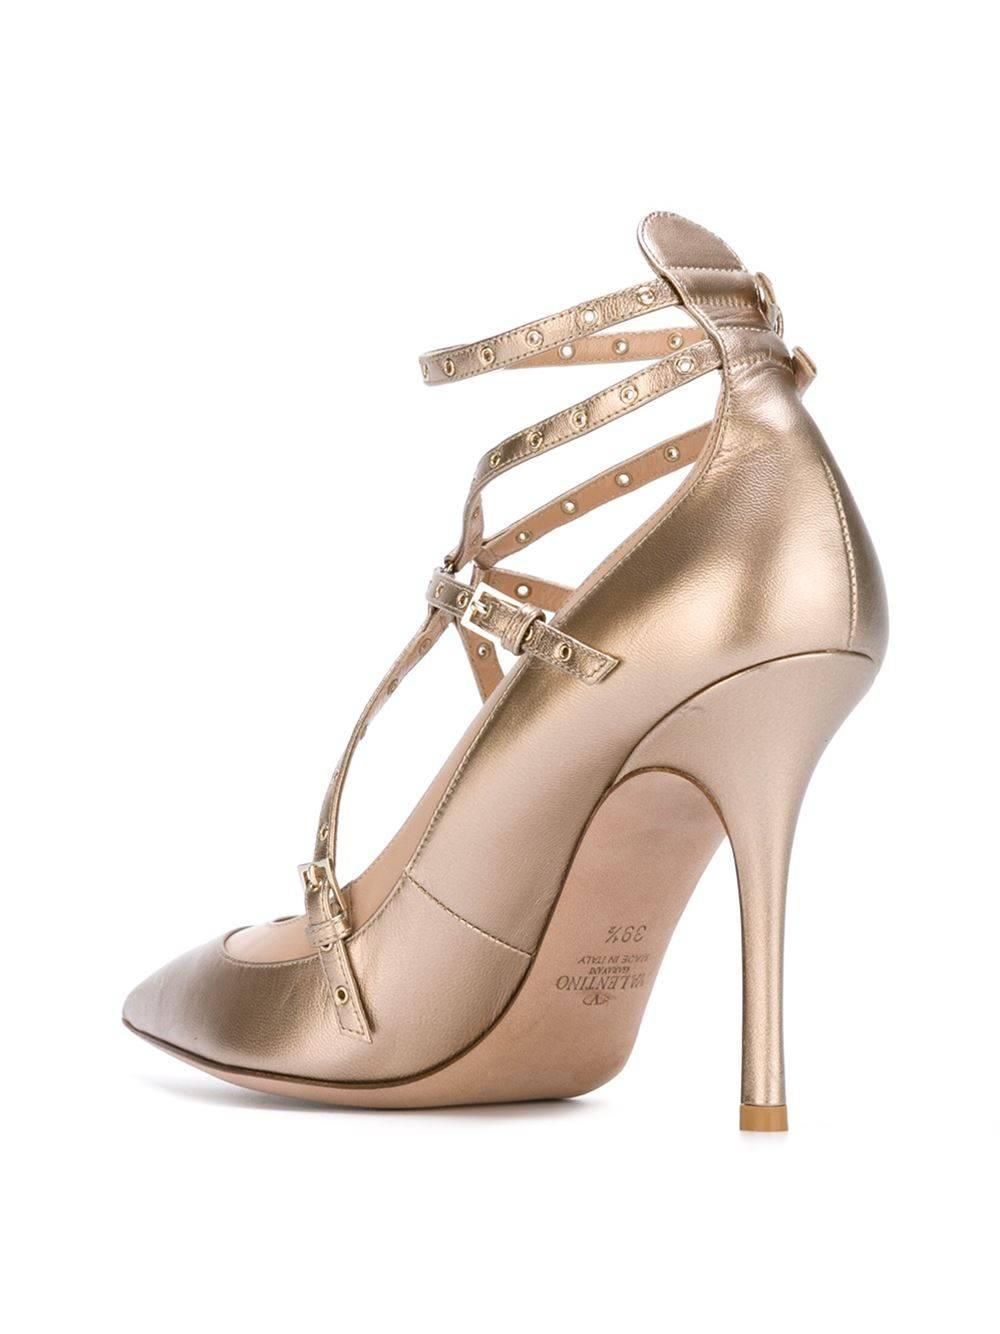 Valentino New Gold Bronze Leather Strappy Cut Out Heels Sandals in Box  2